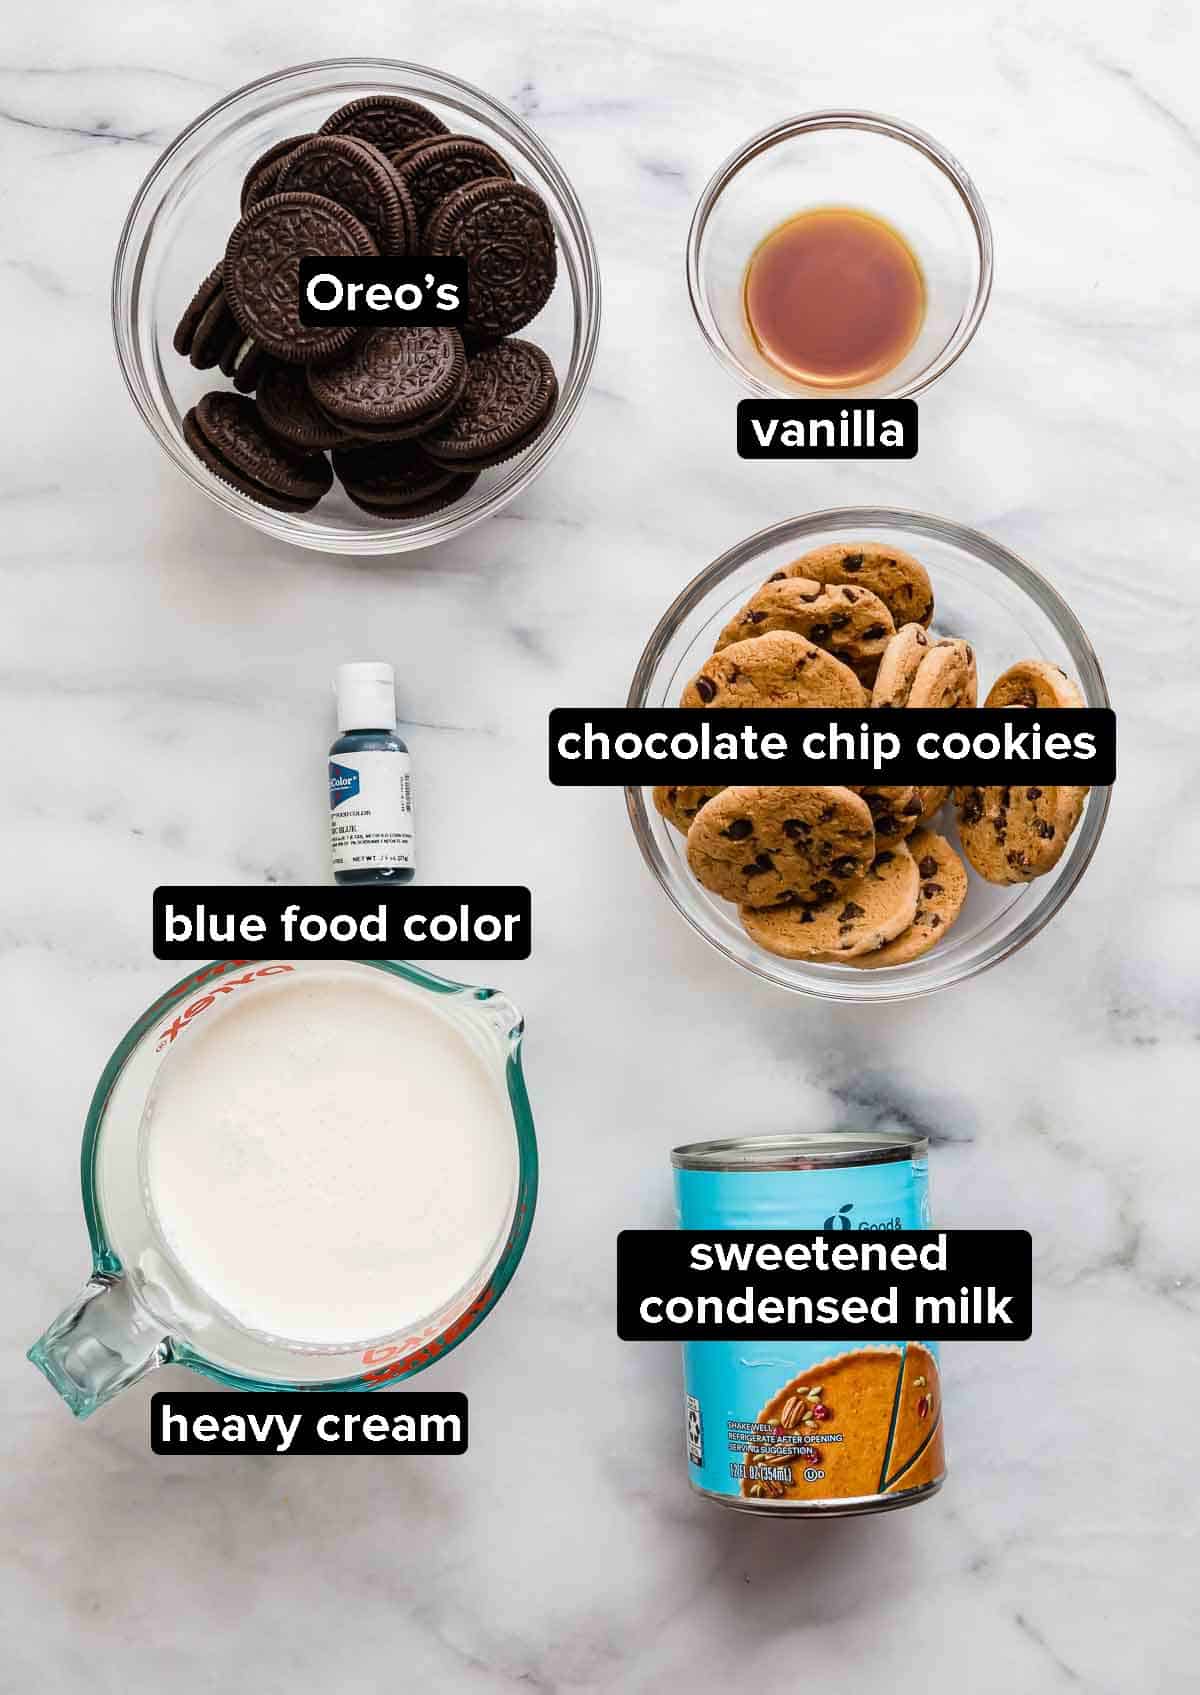 Cookie Monster Ice Cream ingredients on a white marble background: ingredients include Oreos, chocolate chip cookies, vanilla, heavy cream, and sweetened condensed milk.